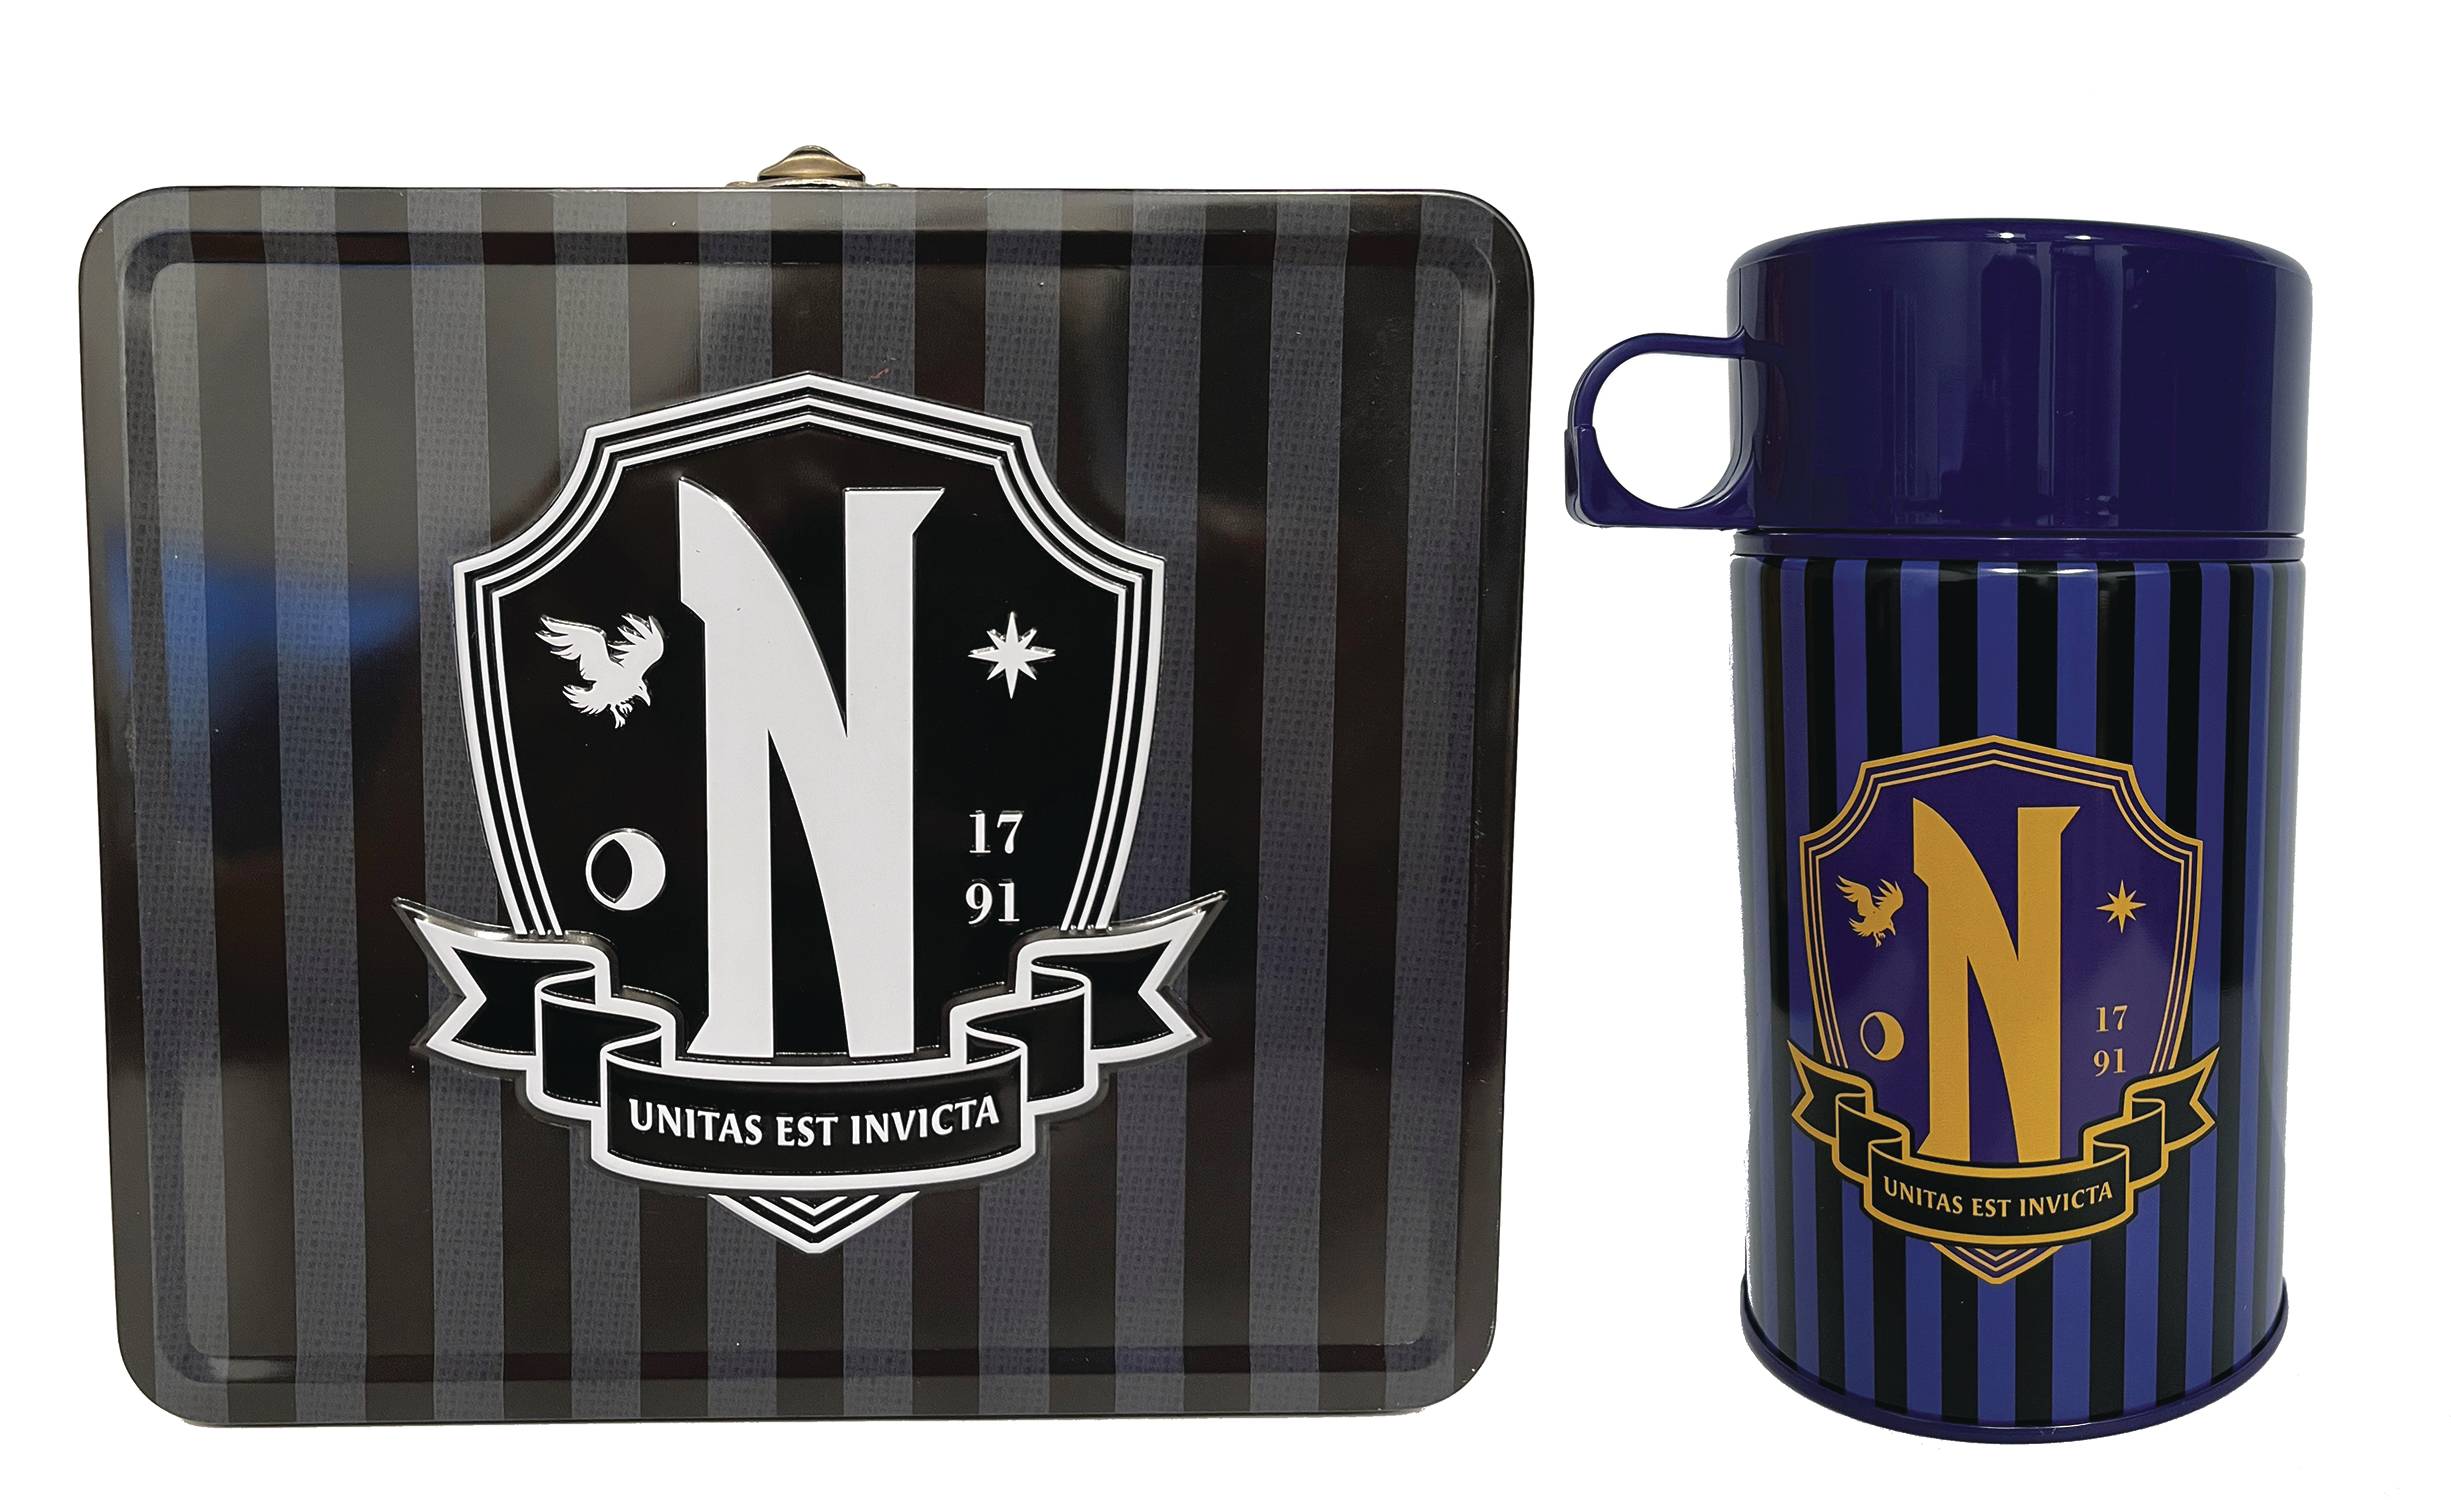 TIN TITANS WEDNESDAY NEVERMORE ACADEMY PX LUNCH BOX